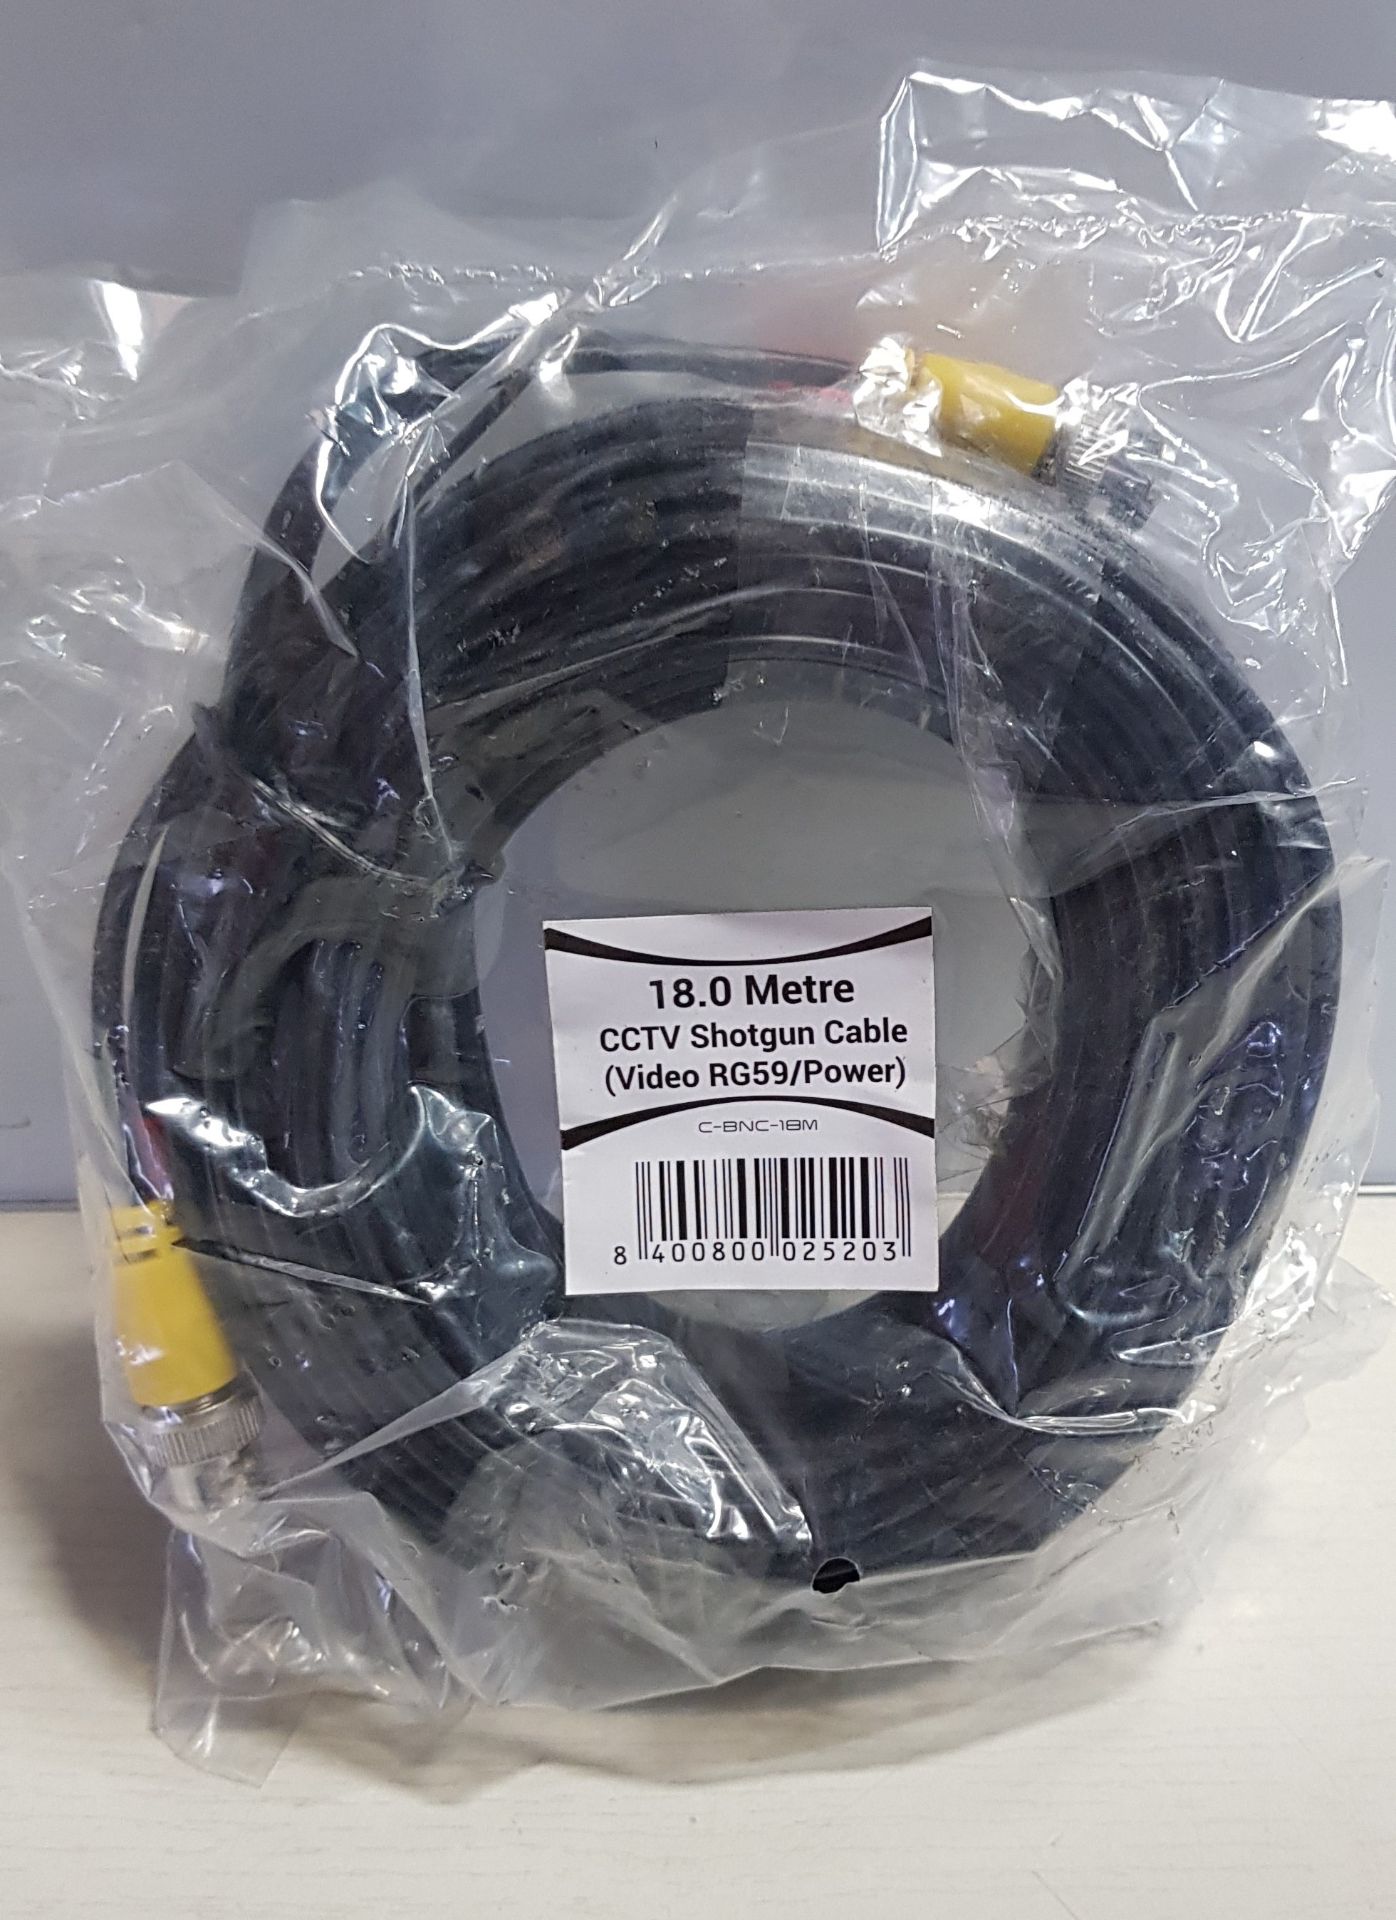 250 X BRAND NEW 18 METRE CCTV SHOTGUN CABLE (VIDEO SPACE RG59/POWER) IN 10 BOXES